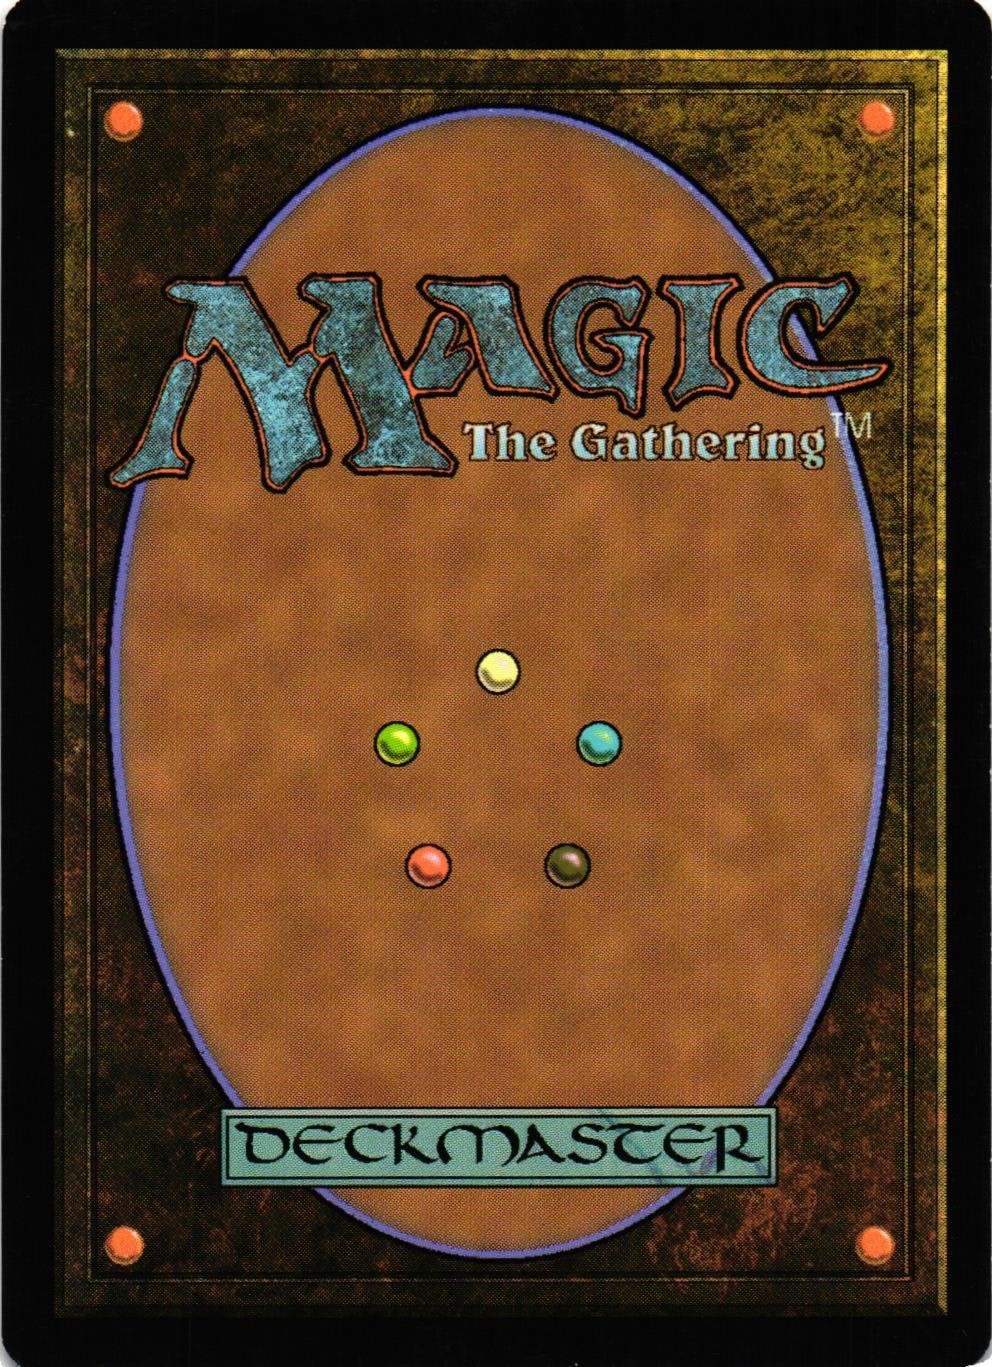 Searing Light Common 033/184 Oath of the Gatewatch (OGW) Magic the Gathering